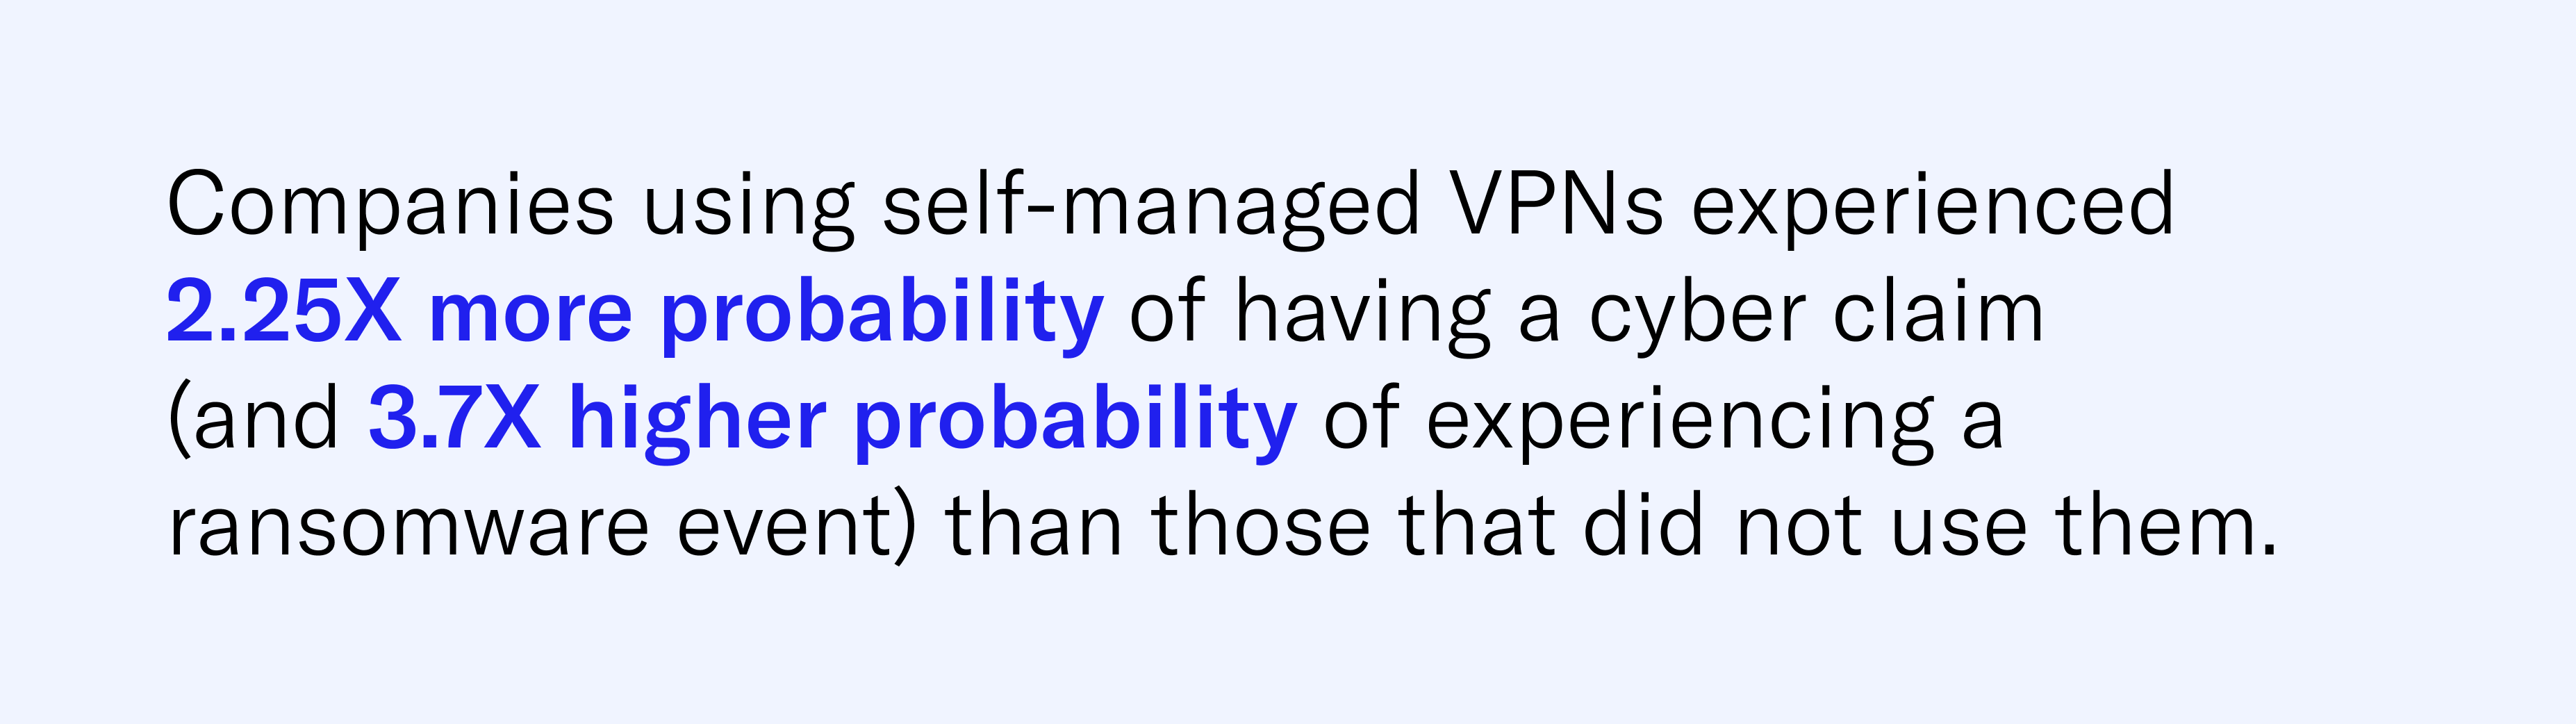 Companies using self-managed VPNs experienced 2.25X more probability of having a cyber claim (and 3.7X higher probability of experiencing a ransomware event) than those that did not use them. 